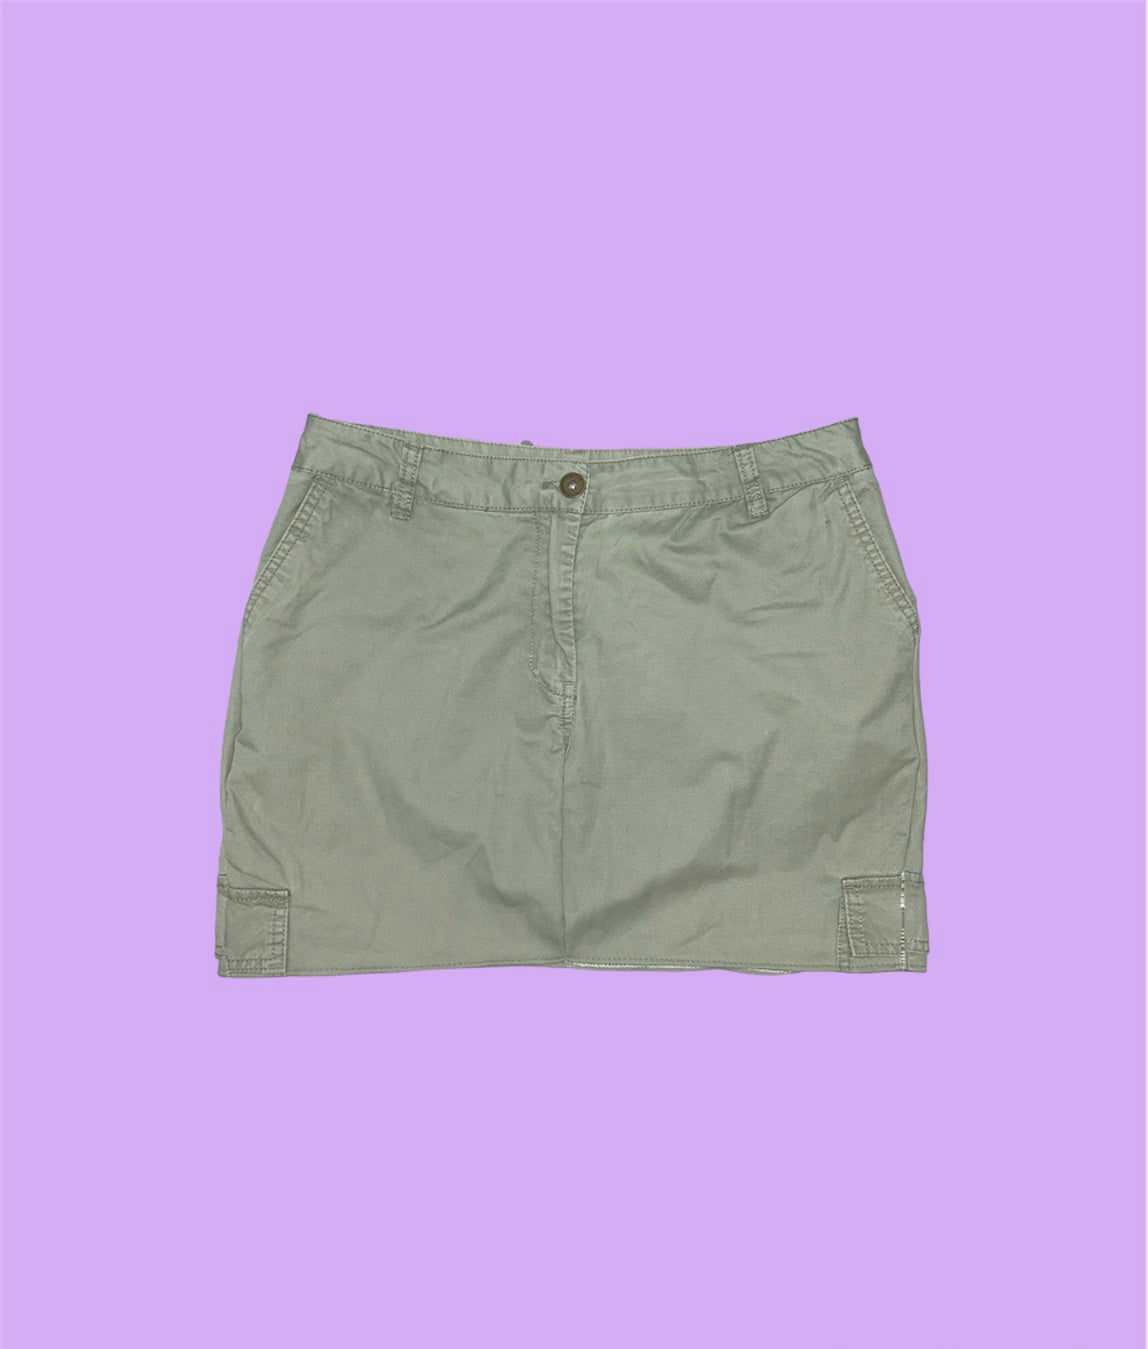 light green cargo mini skirt shown on a lilac background